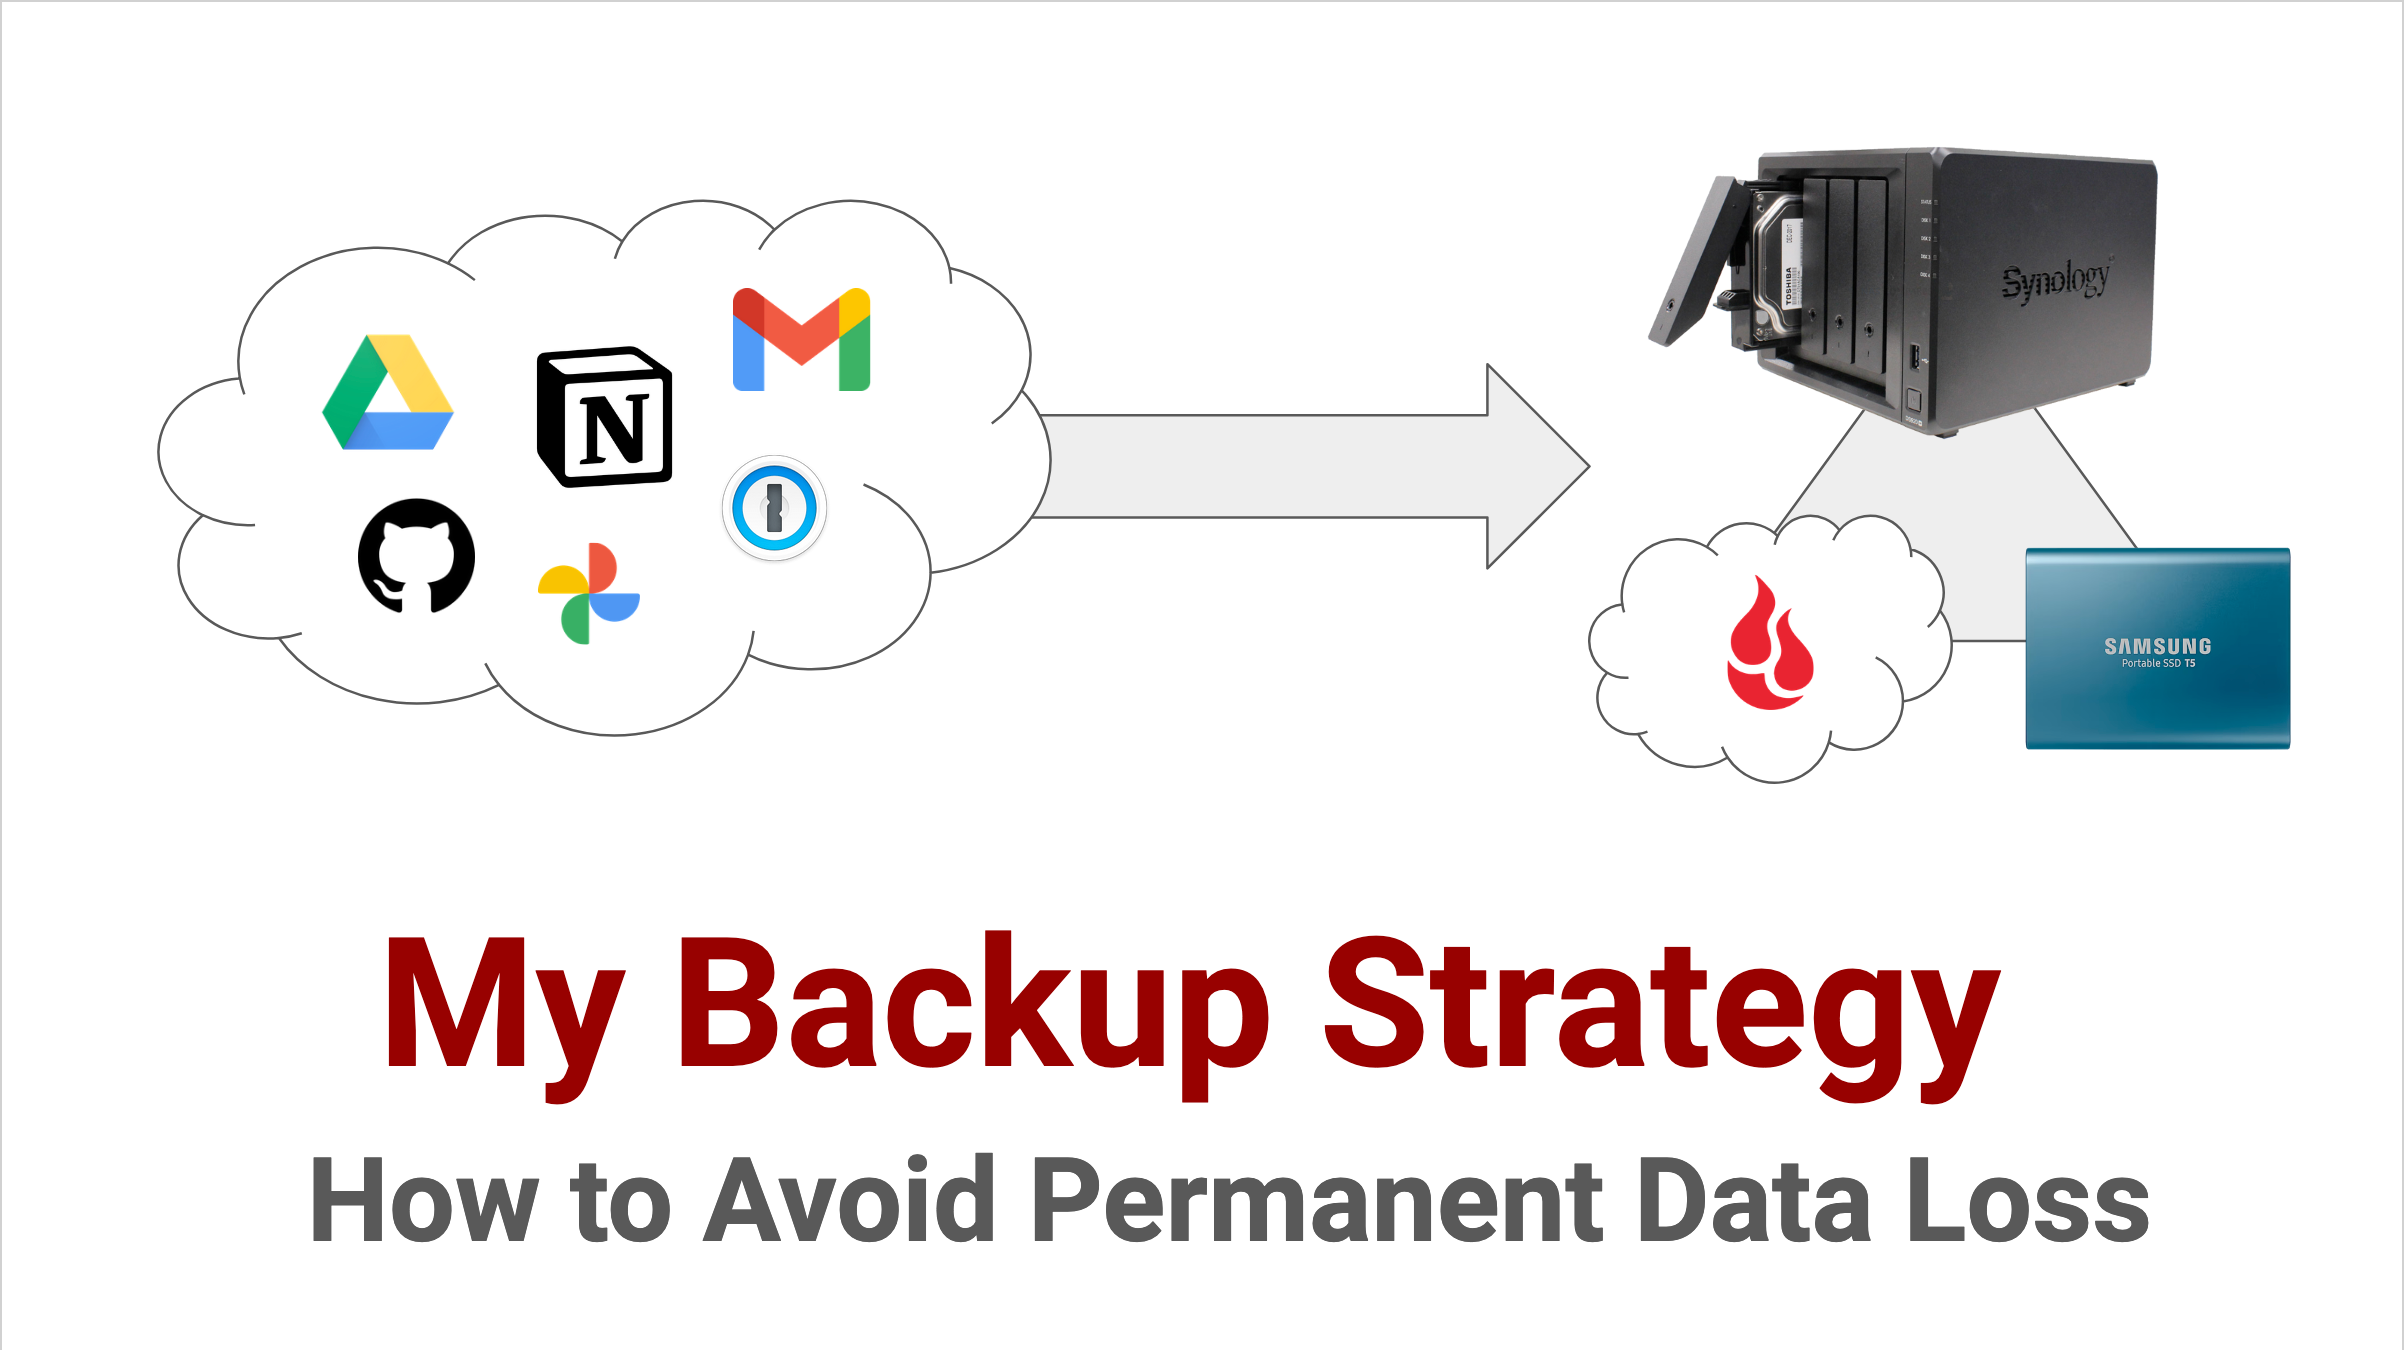 [My Backup Strategy](/posts/my-backup-strategy/): I recently performed another round of backups as described in this blogpost, as part of my [Yearly Life Reviews](/posts/yearly-life-reviews/). 